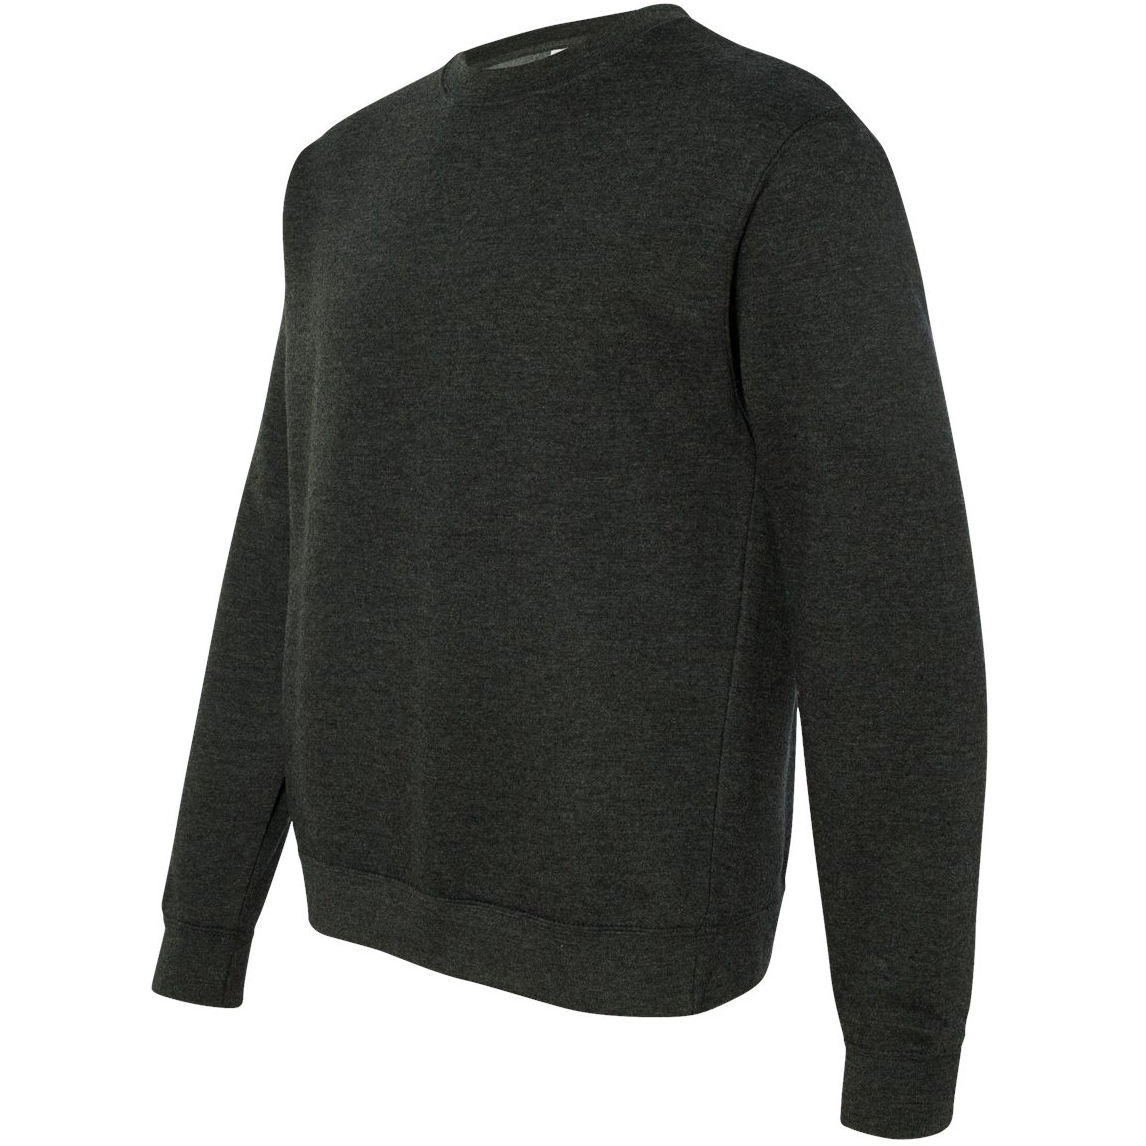 Independent Trading Co. SS3000 Midweight Crewneck Sweatshirt - Charcoal Heather - 2XL